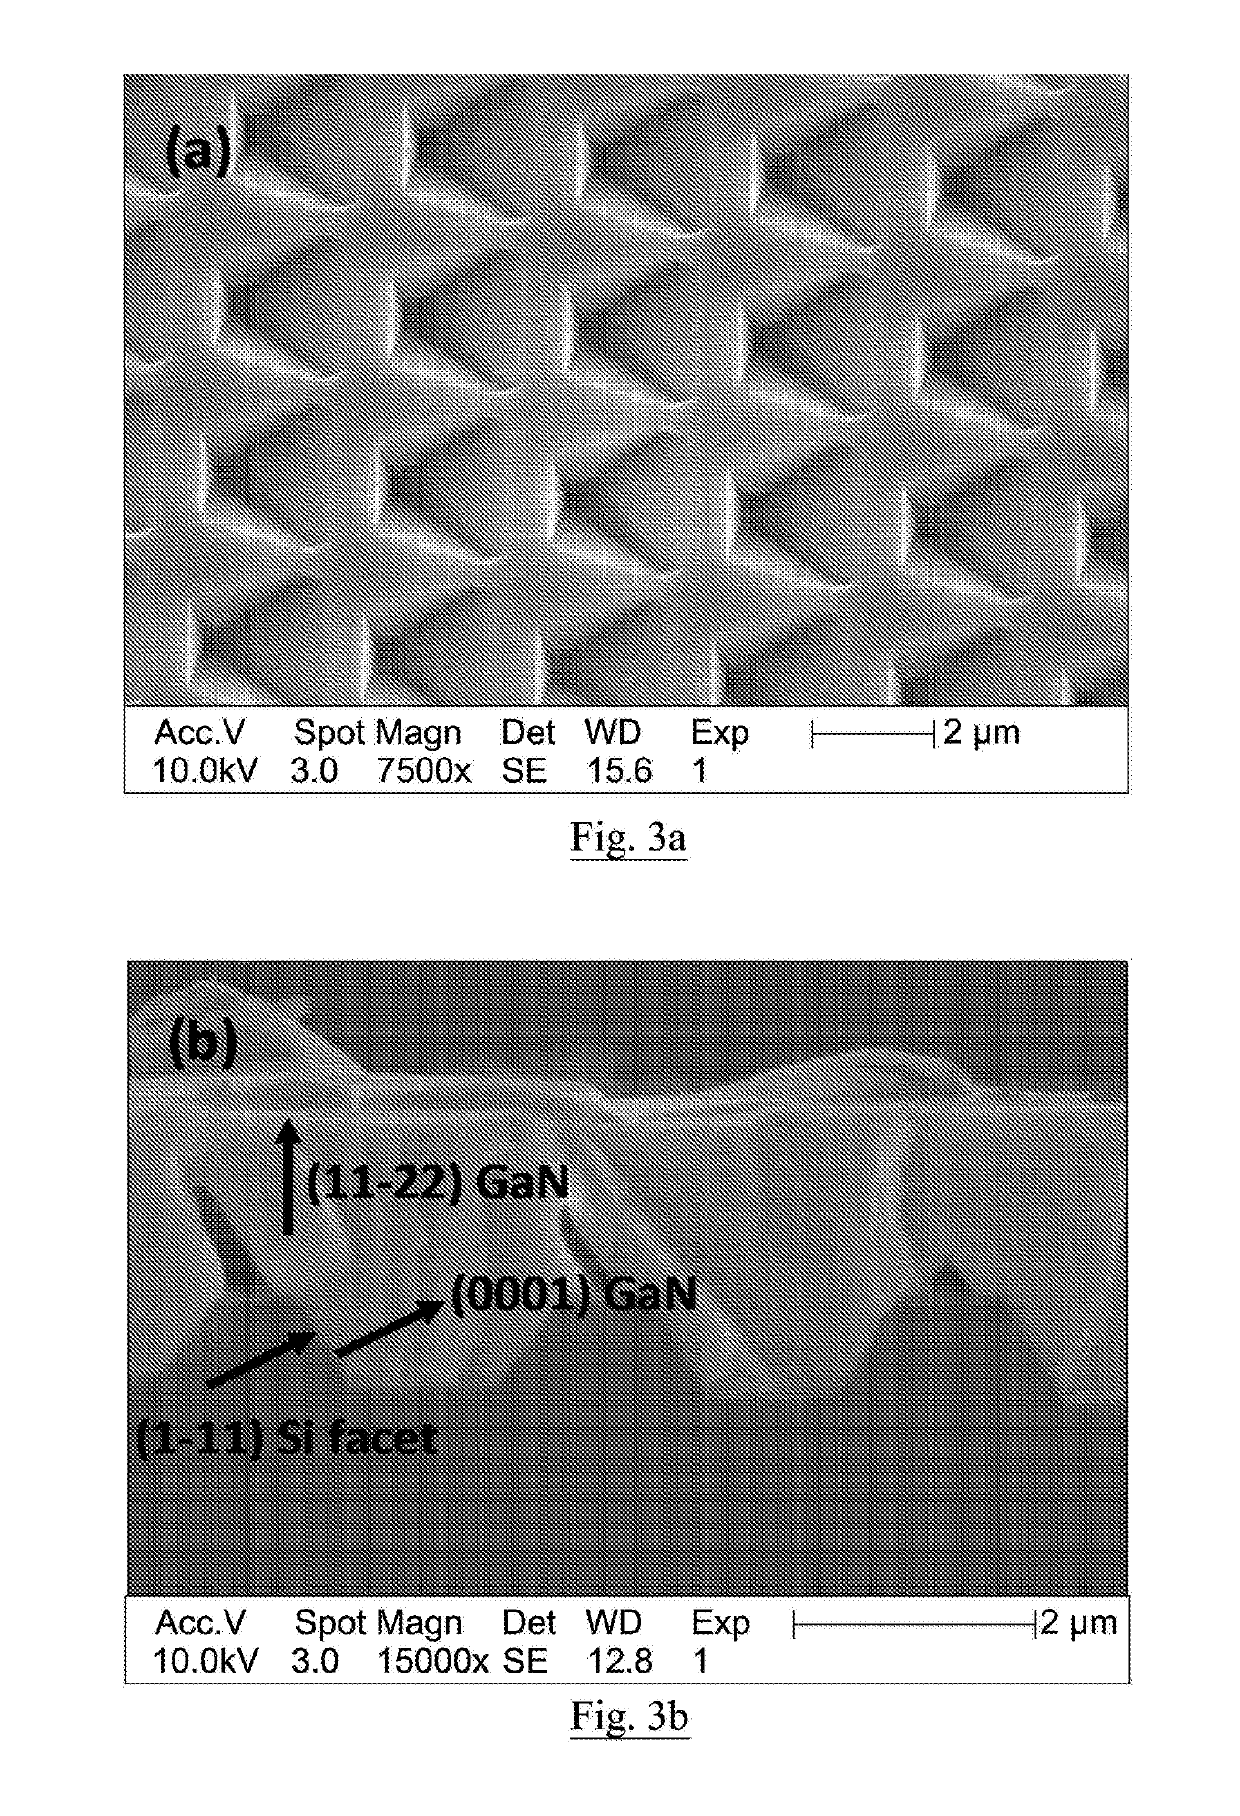 Fabrication of semi-polar crystal structures